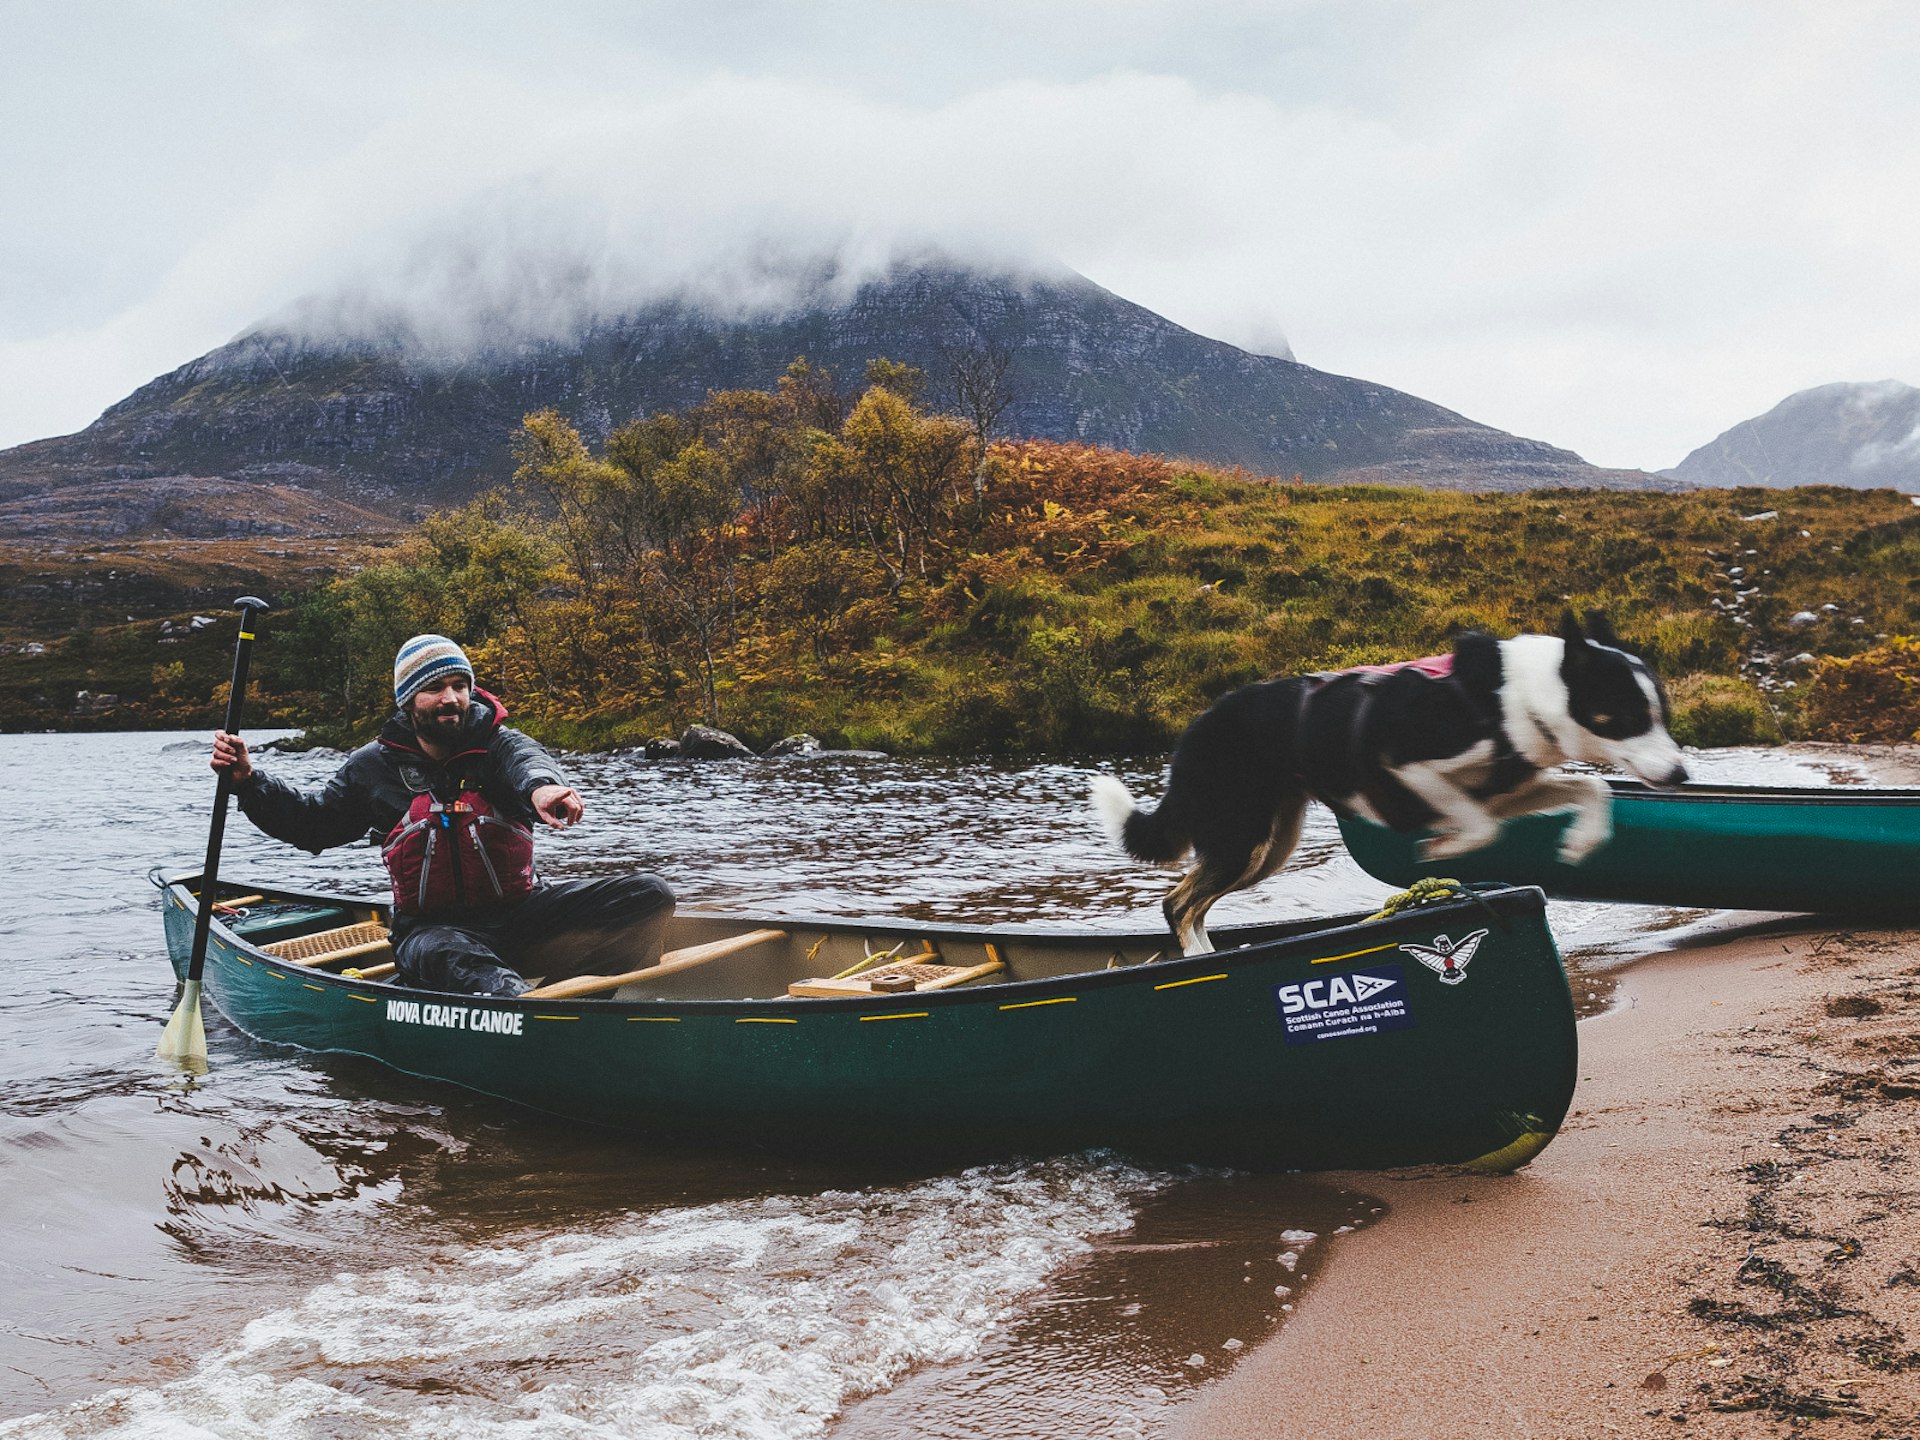 Kiera the border collie leaps out of a canoe as guide Tim Hamlet beaches it on Loch Lurgainn under the peak of Stac Pollaidh